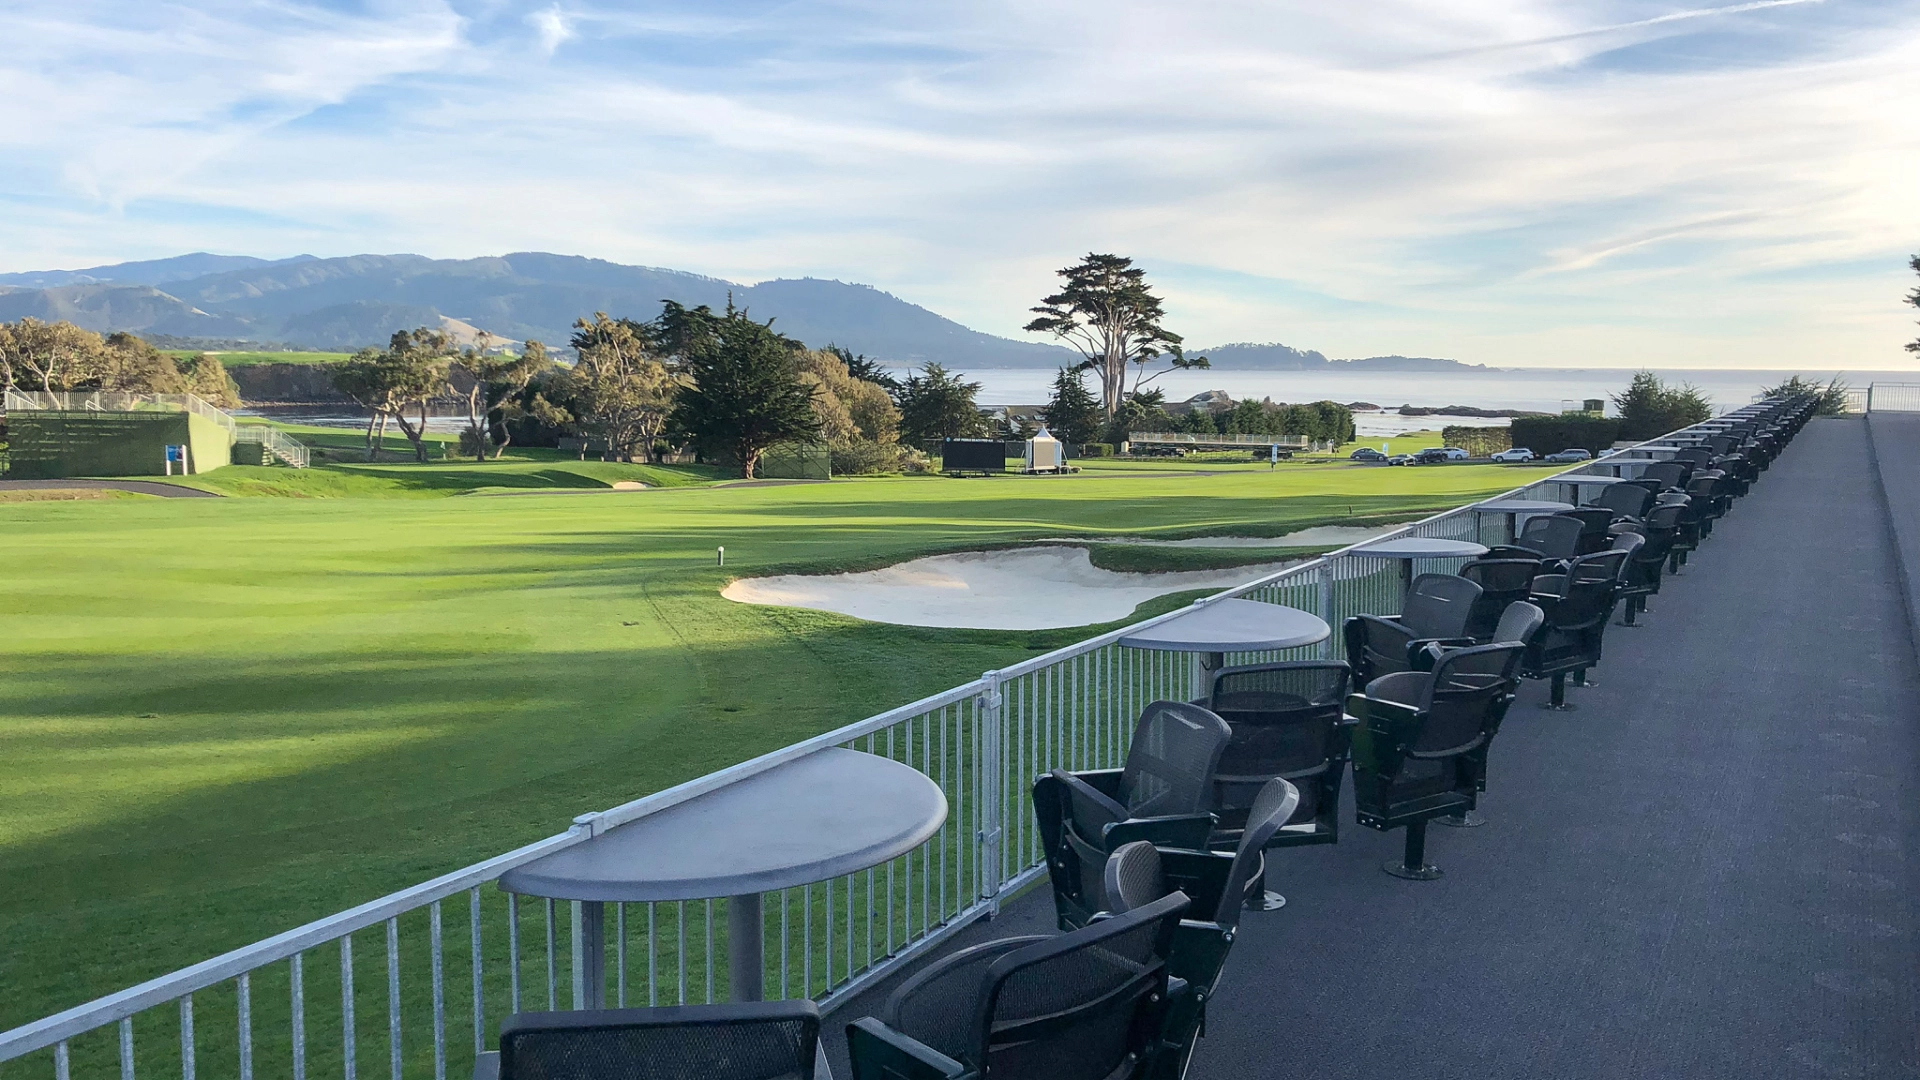 Oustide environmental shot of Pebble Beach Golf tournament featuring leased 4Topps Loges.